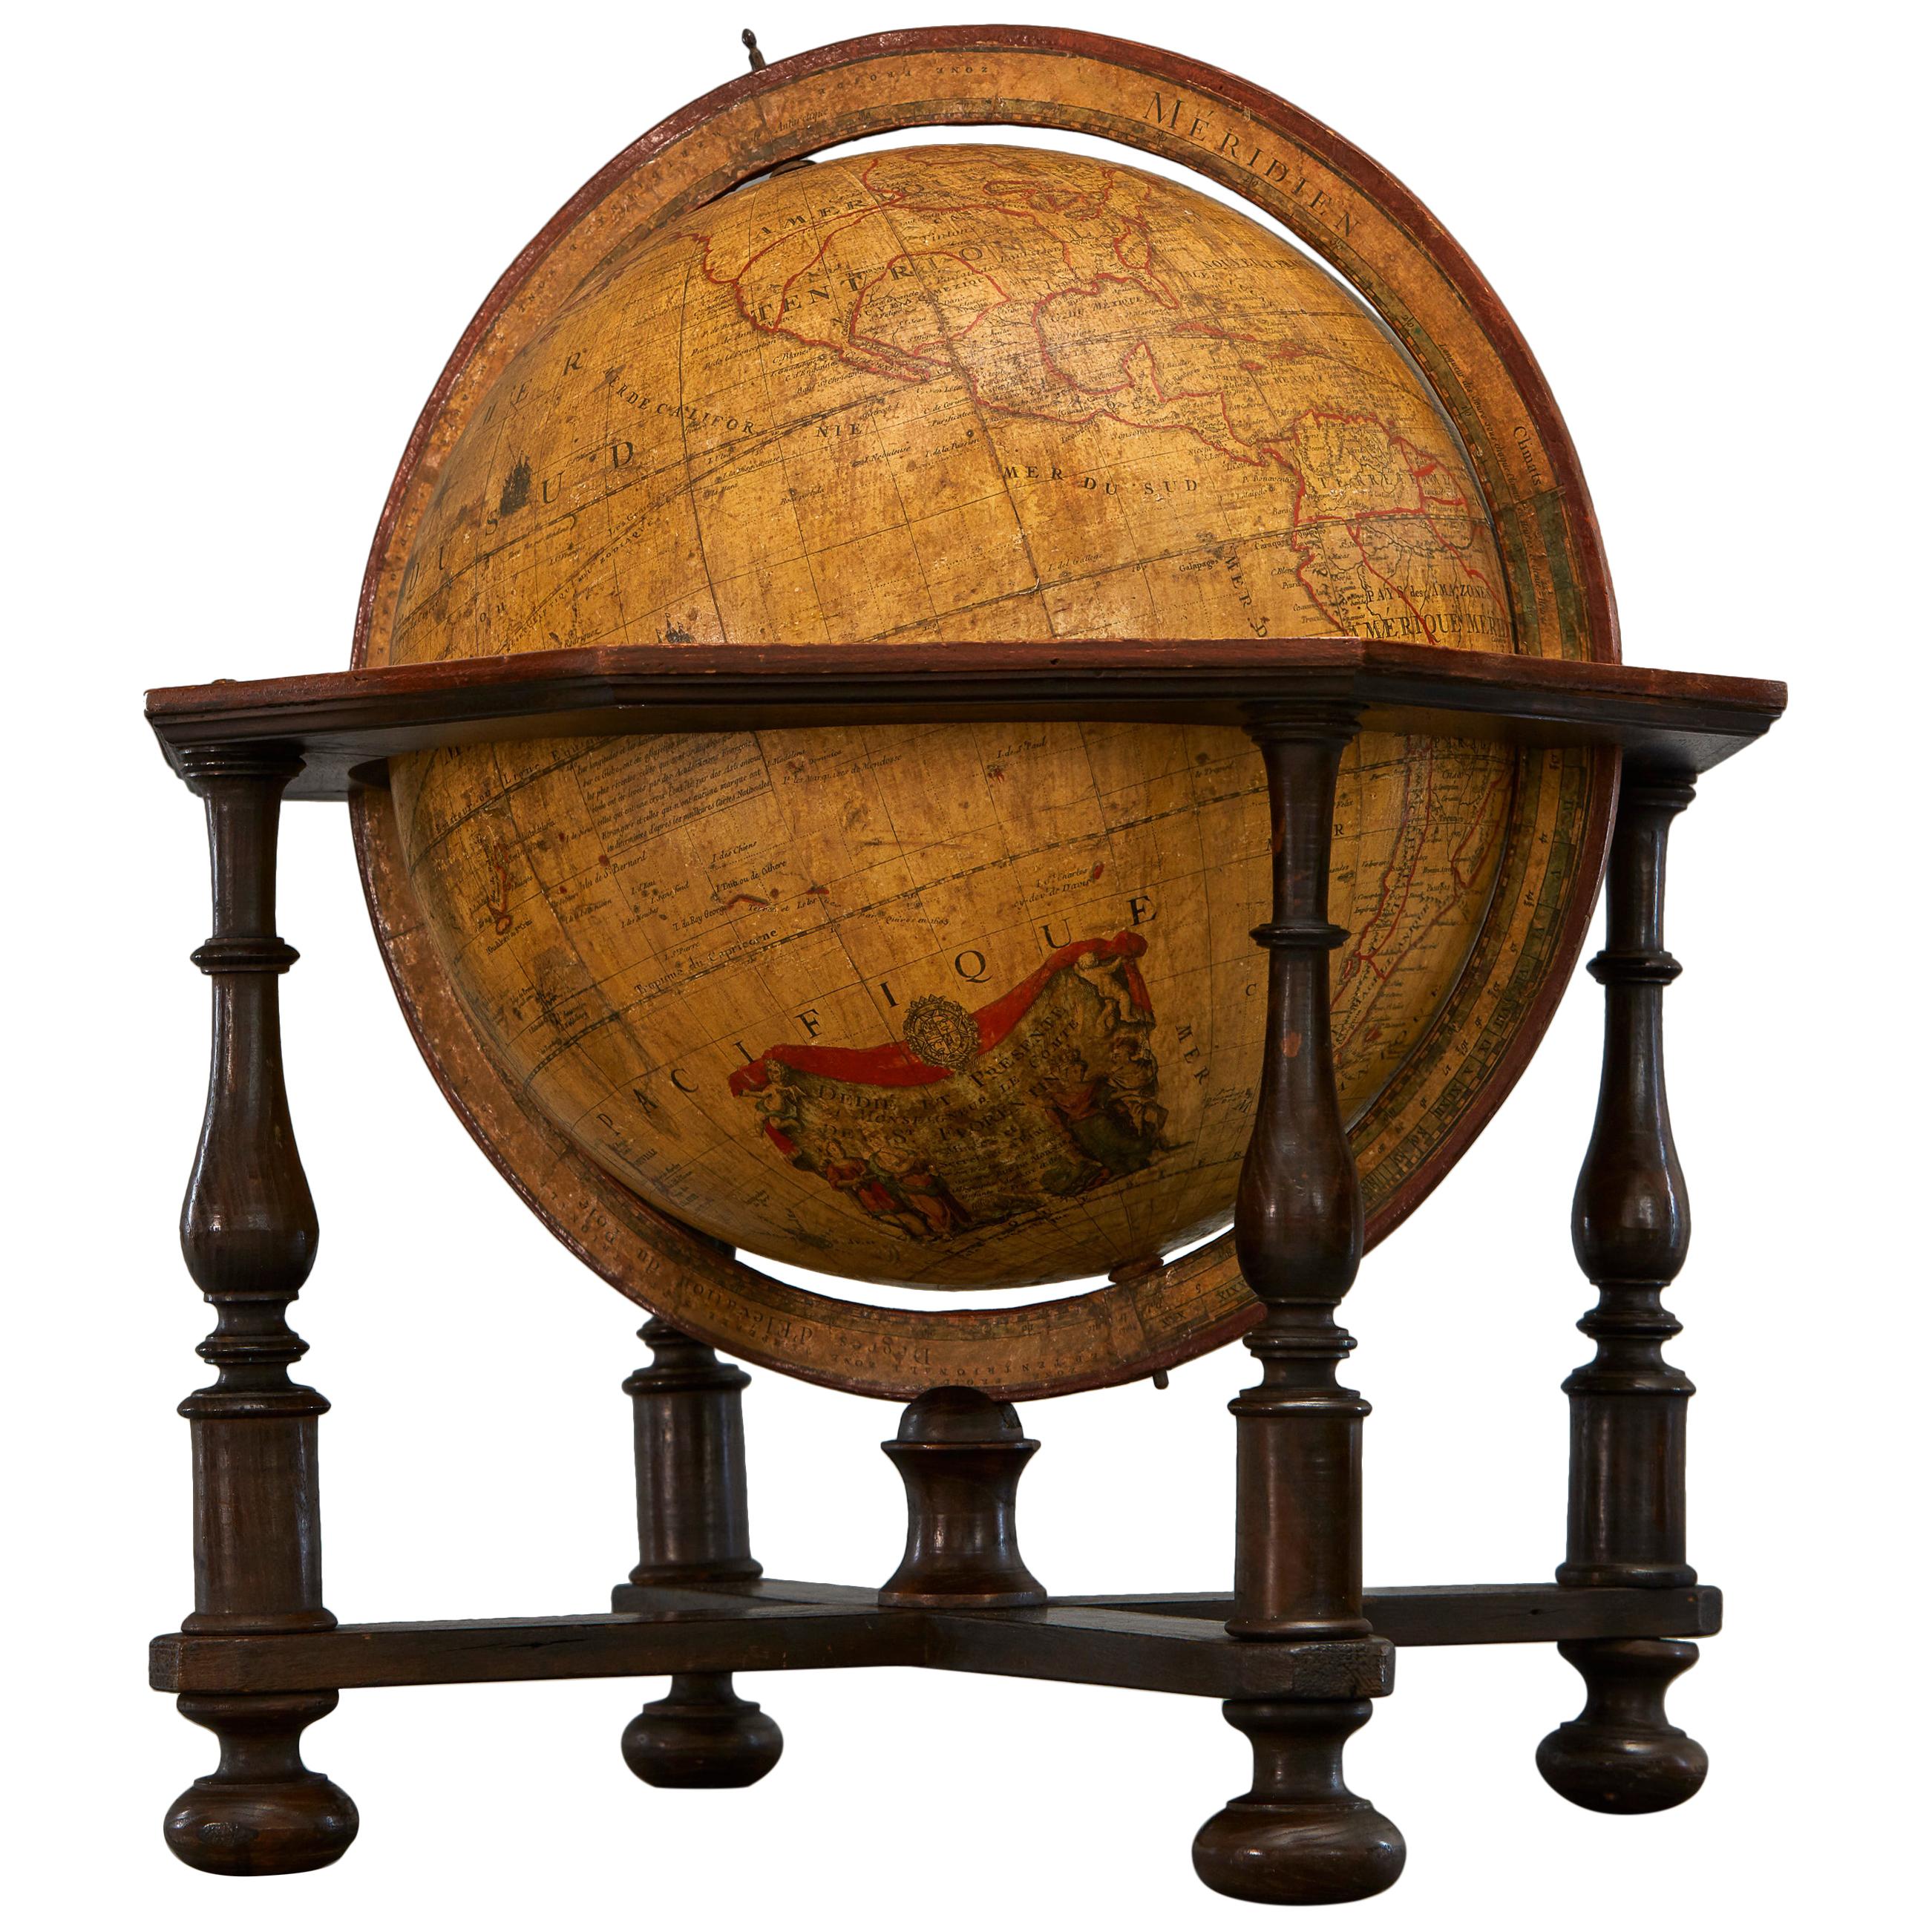 Large 18th Century French Library Terrestrial Globe by Jean Fortin, Paris, 1780